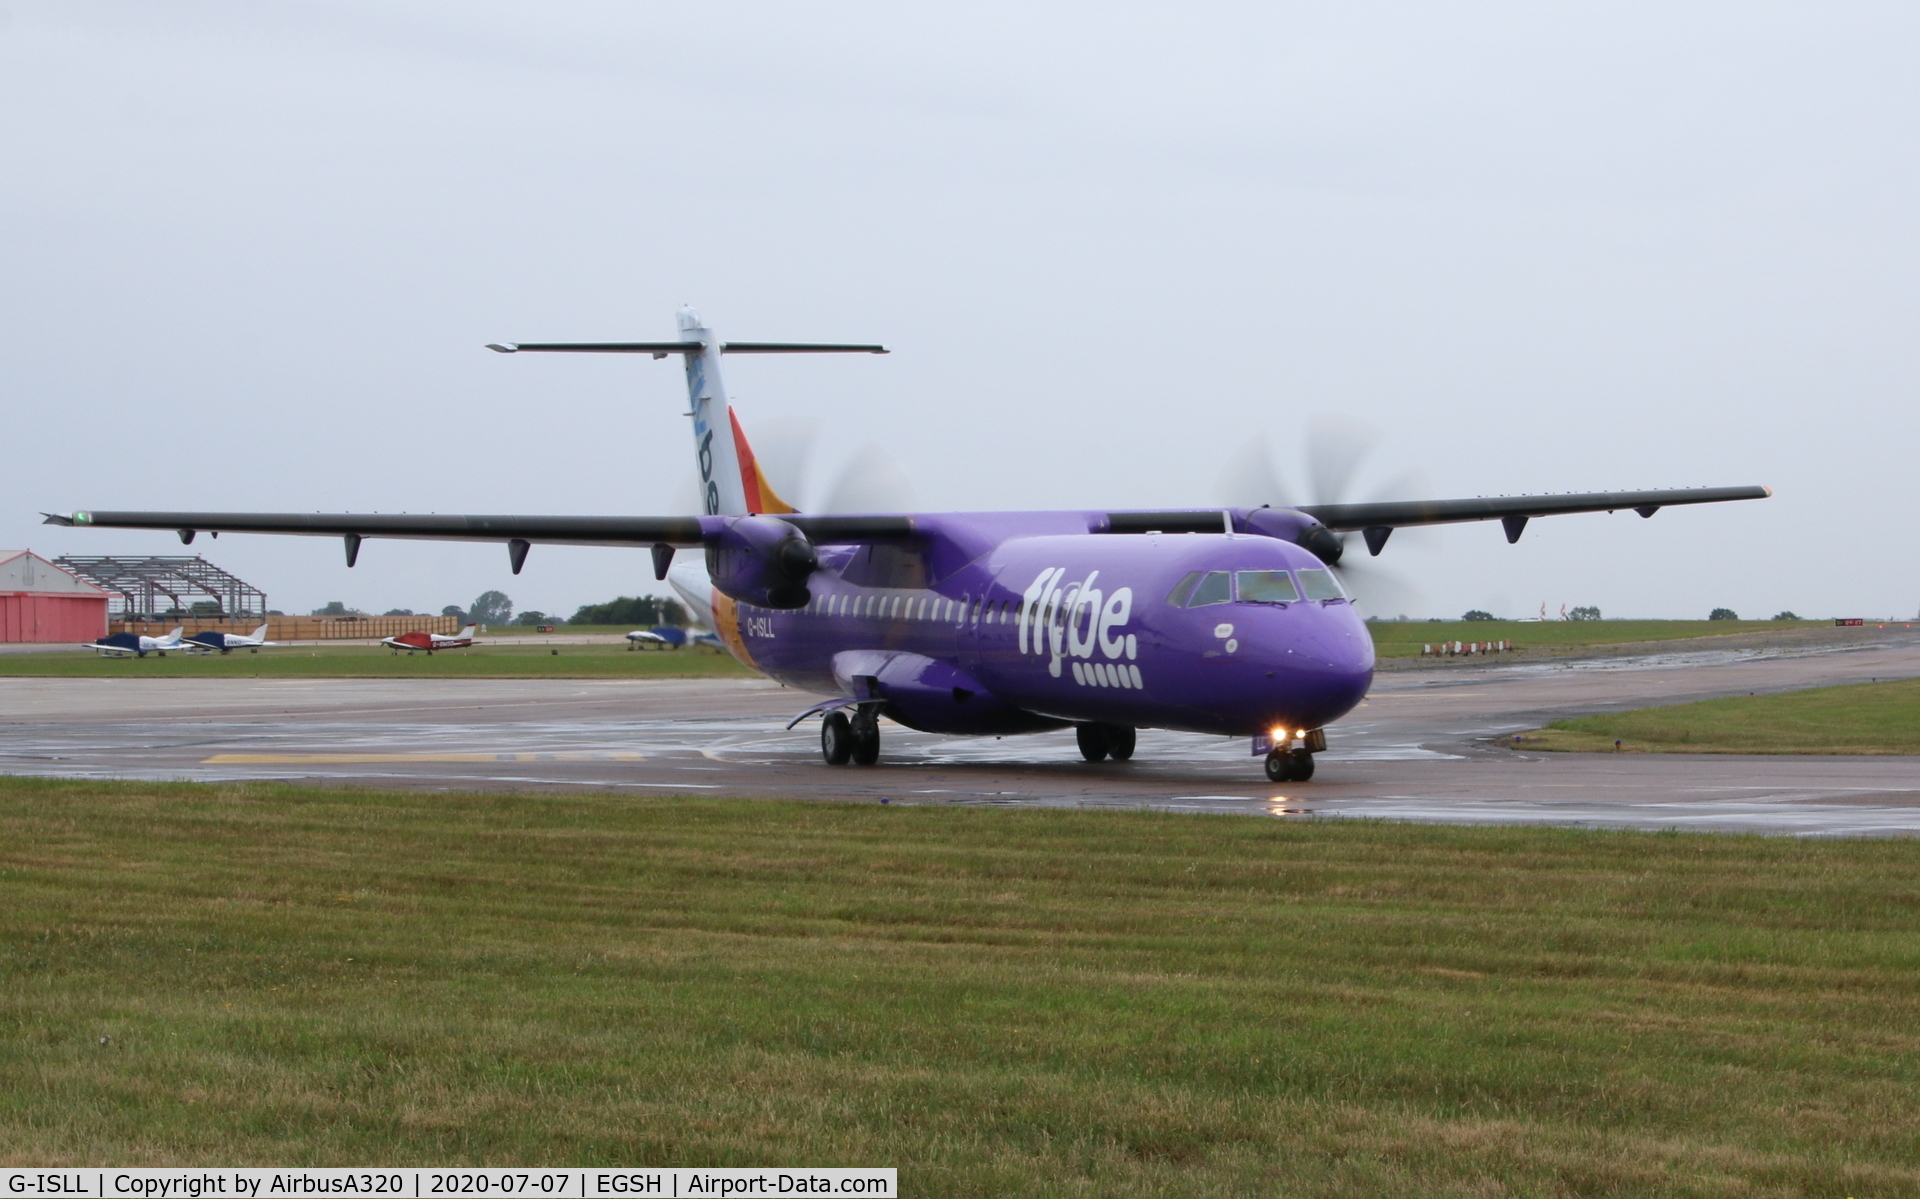 G-ISLL, 2002 ATR 72-212A C/N 696, Arriving at Norwich for a repaint, loosing the Flybe brand